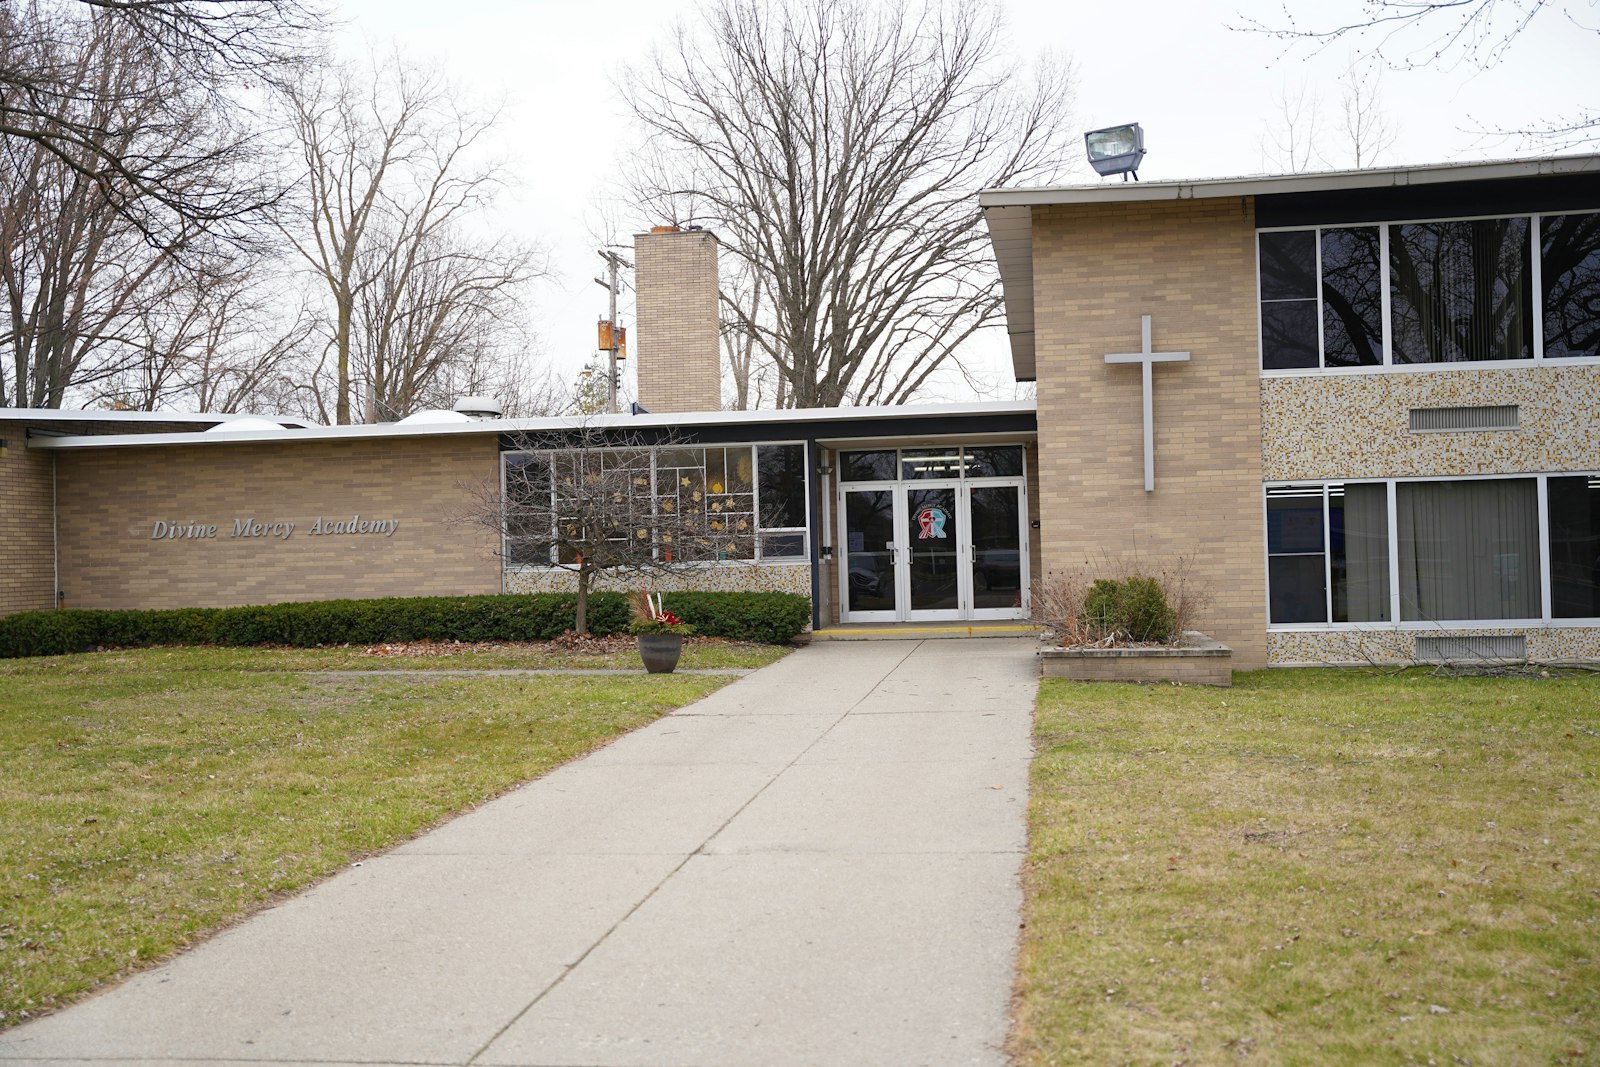 Divine Mercy Academy operates out of the former St. Genevieve School building in Livonia.